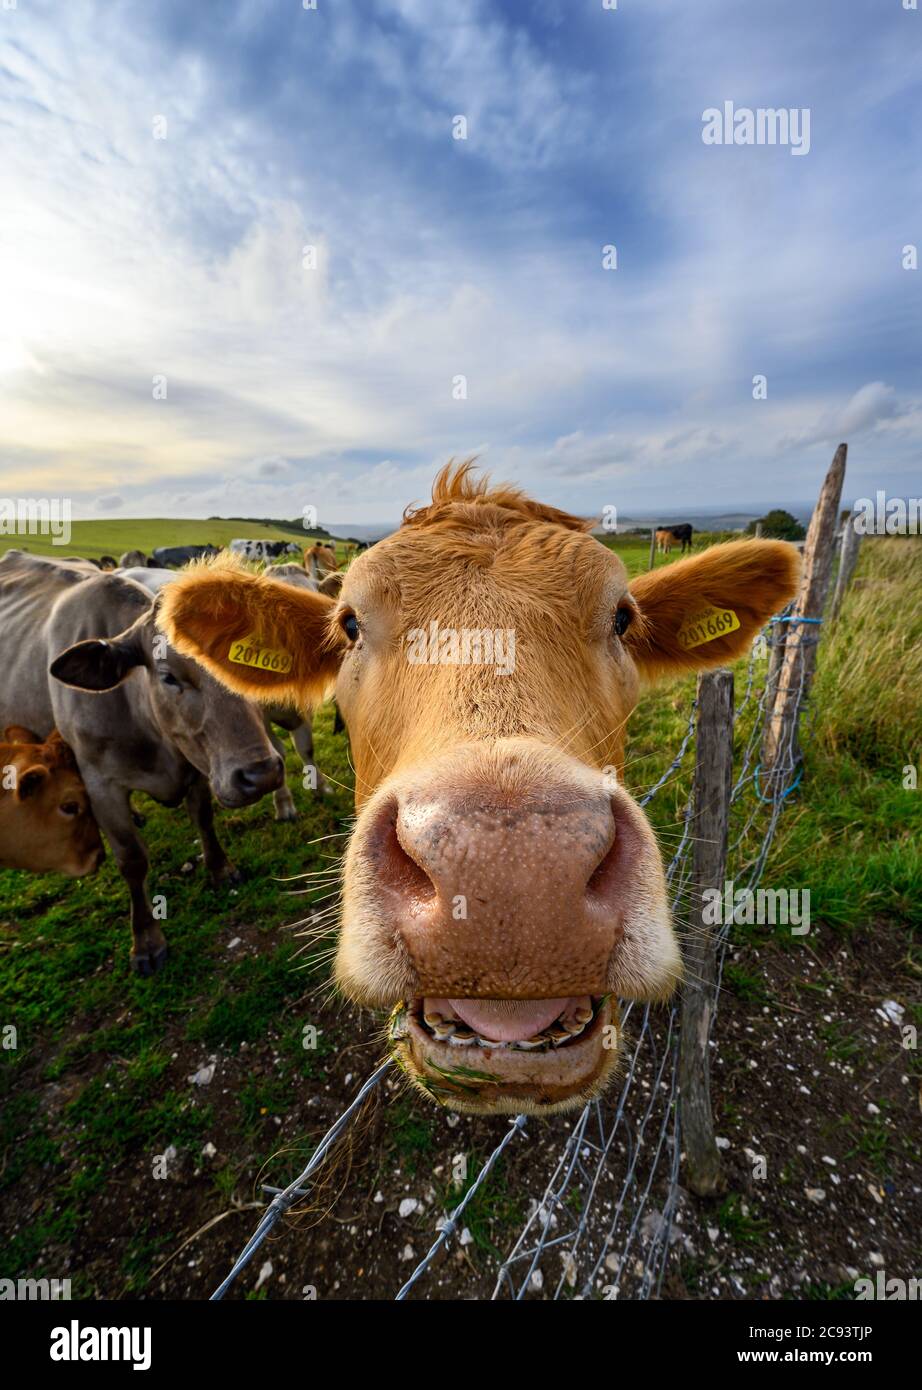 South Downs National Park, Sussex, England, UK. Close up of a cow on a farm on the South Downs Way near Firle Beacon and Newhaven. Stock Photo